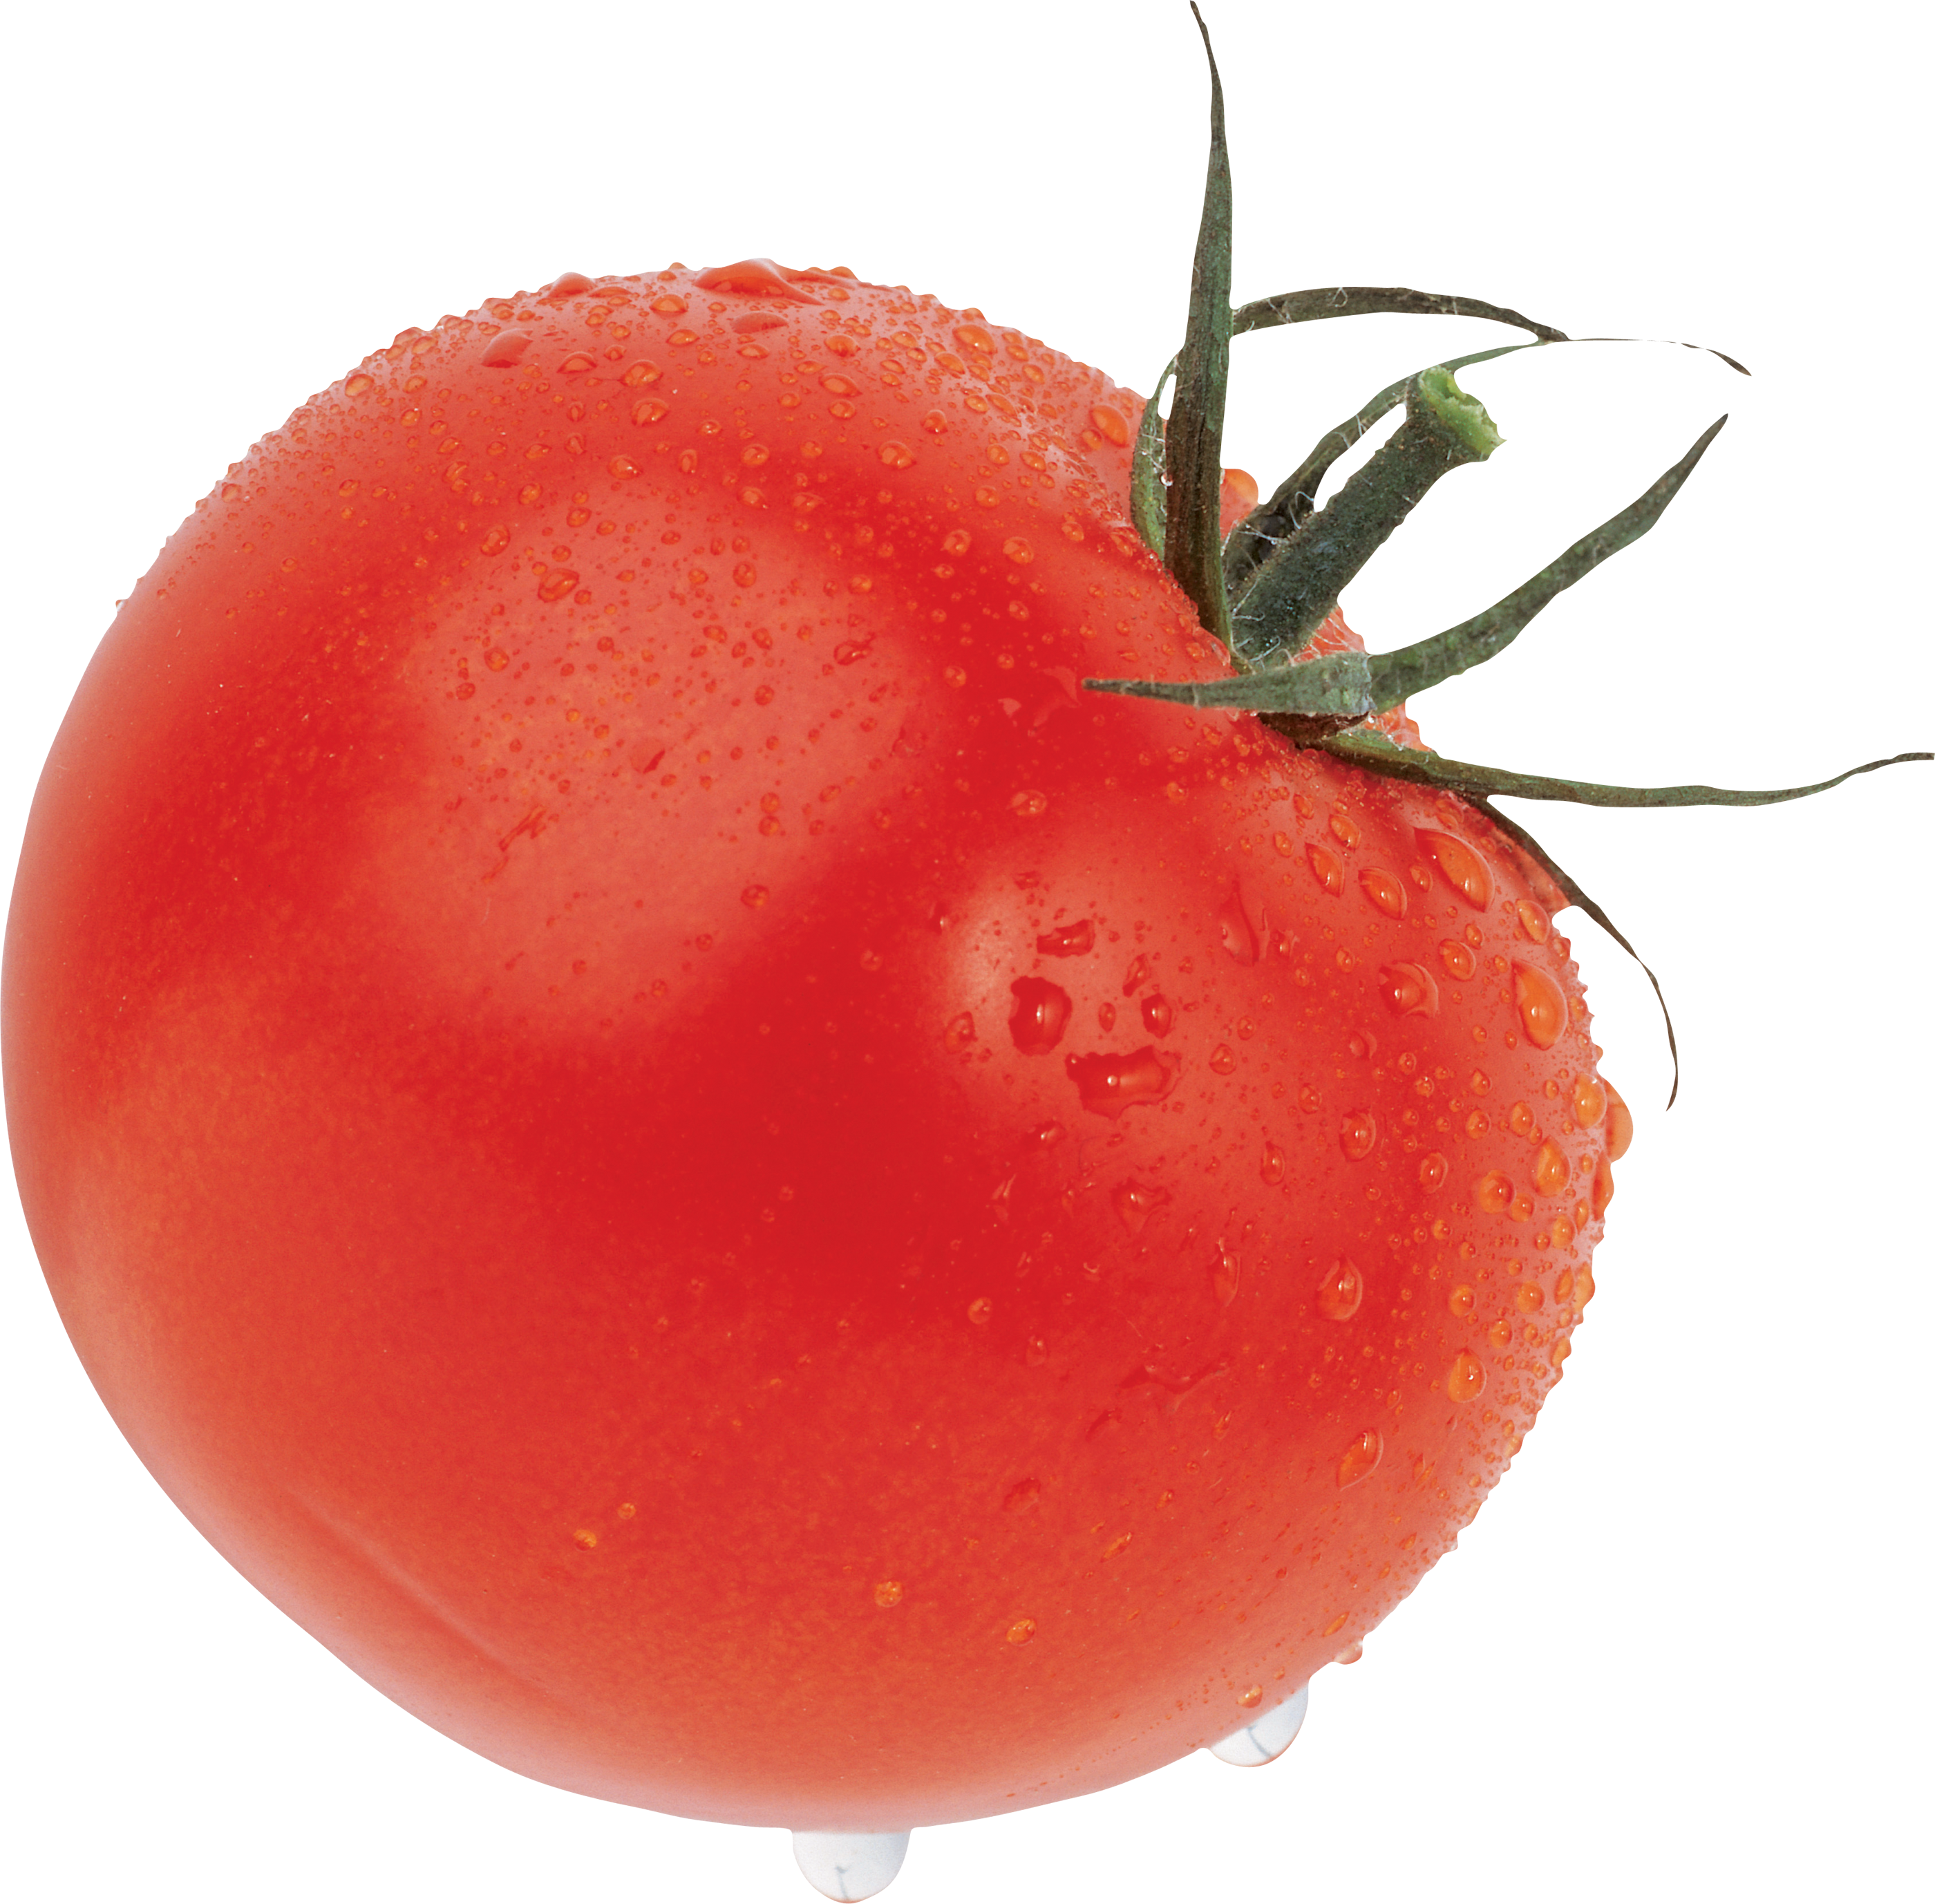 Tomate groß rot